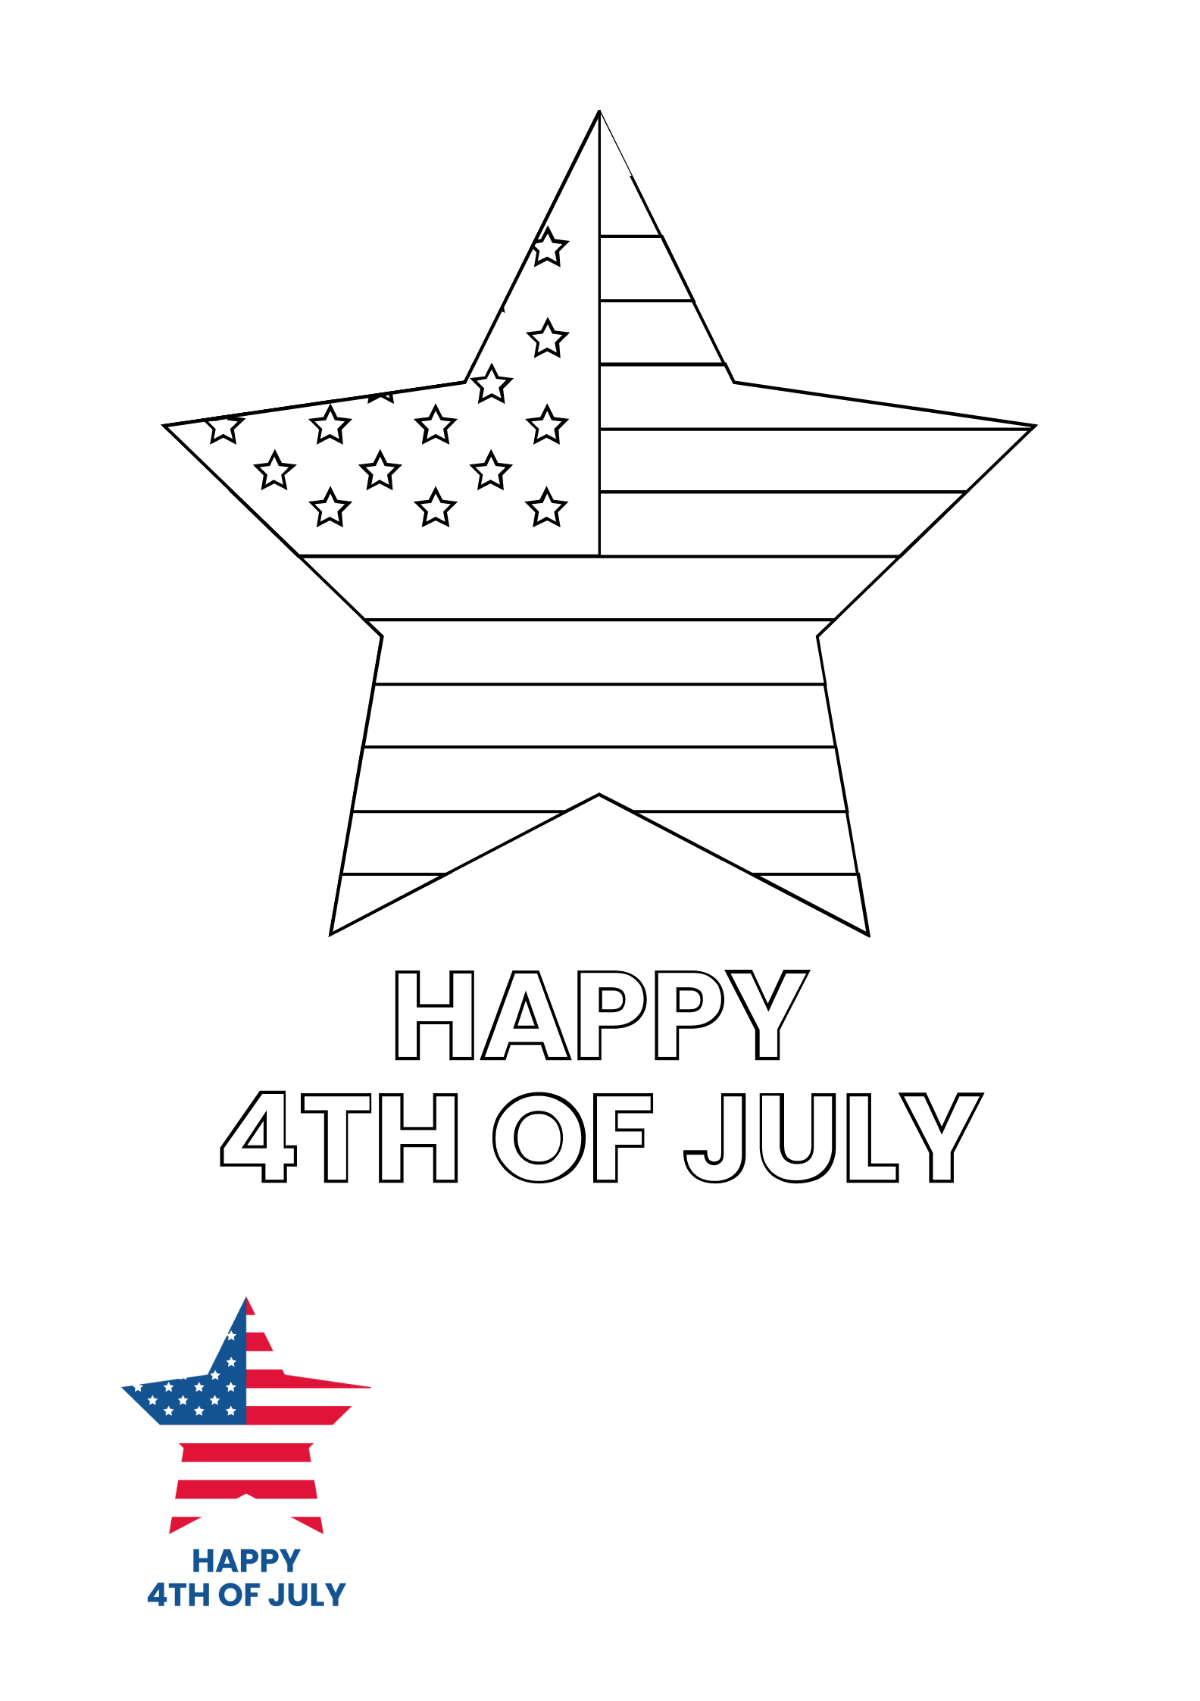 Free Happy 4th Of July Coloring Page Template